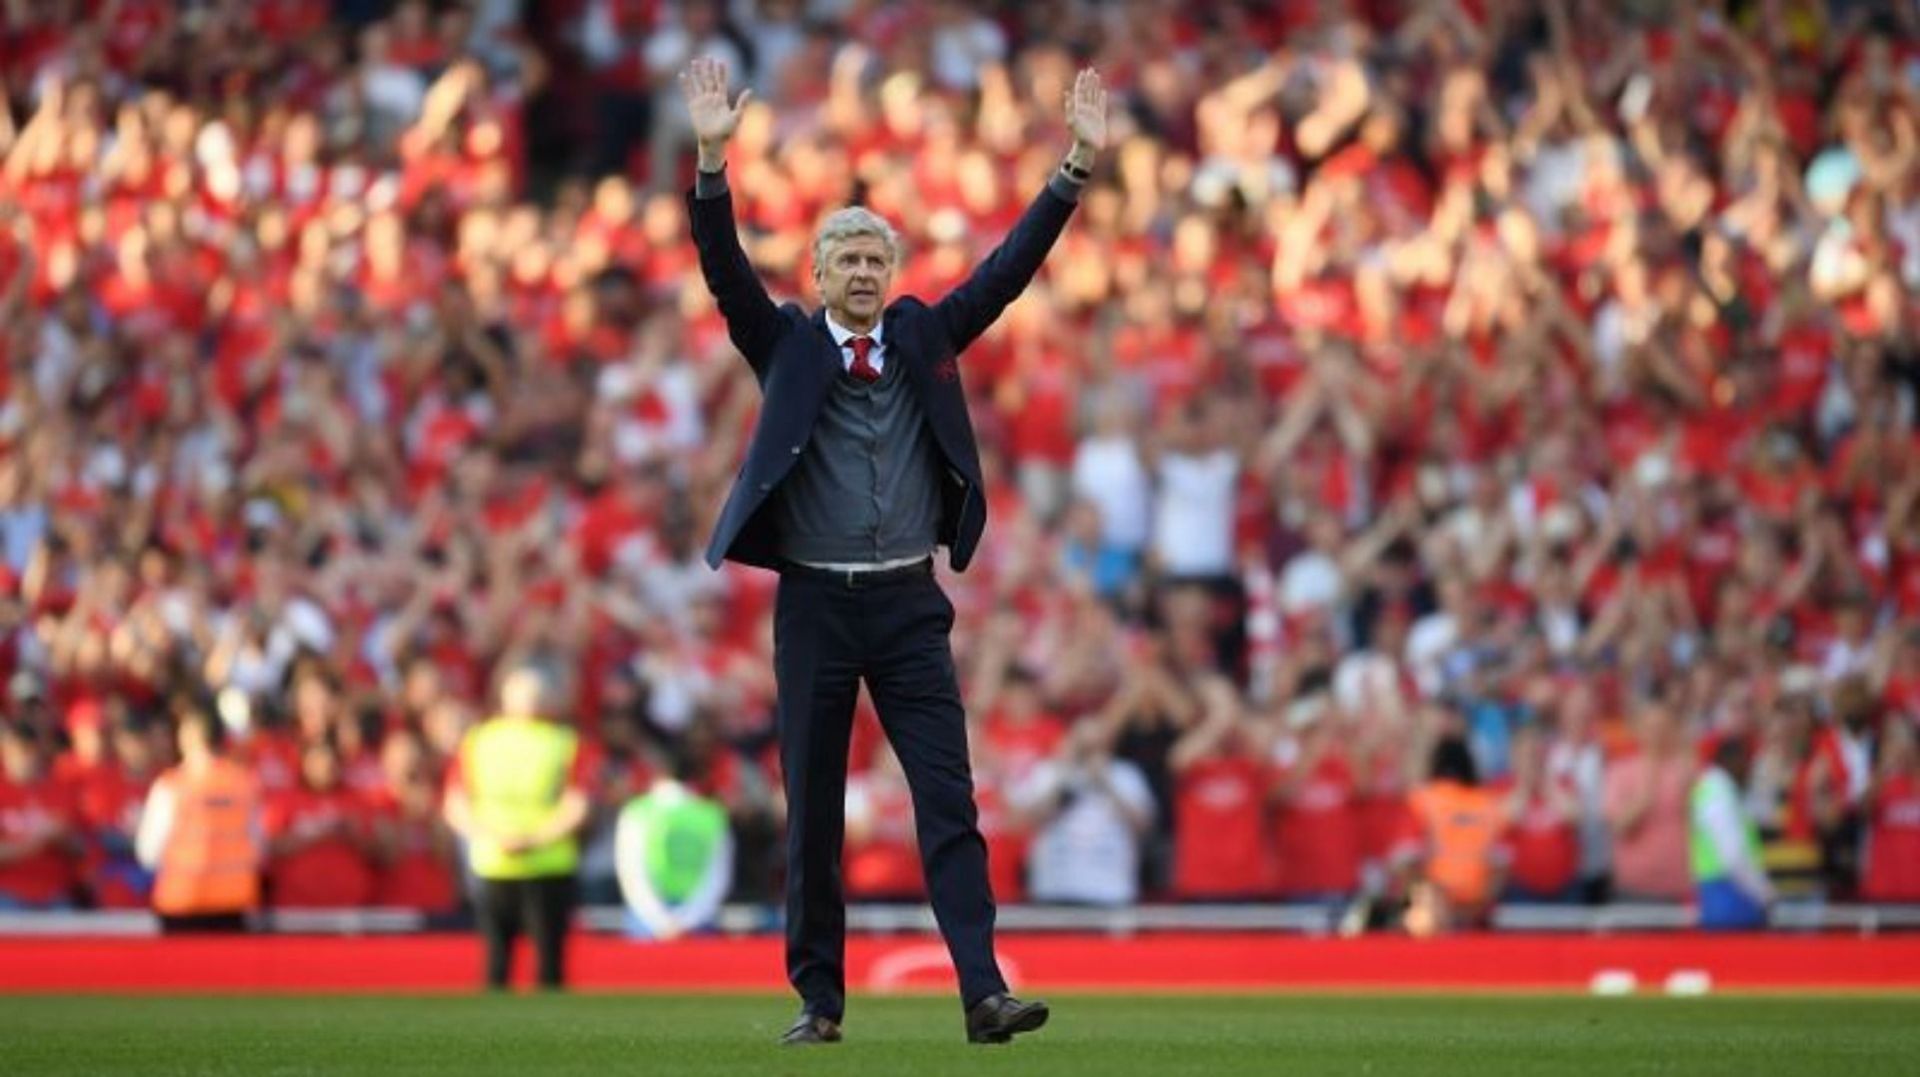 Arsene Wenger is one of the gentlemen of the beautiful game.